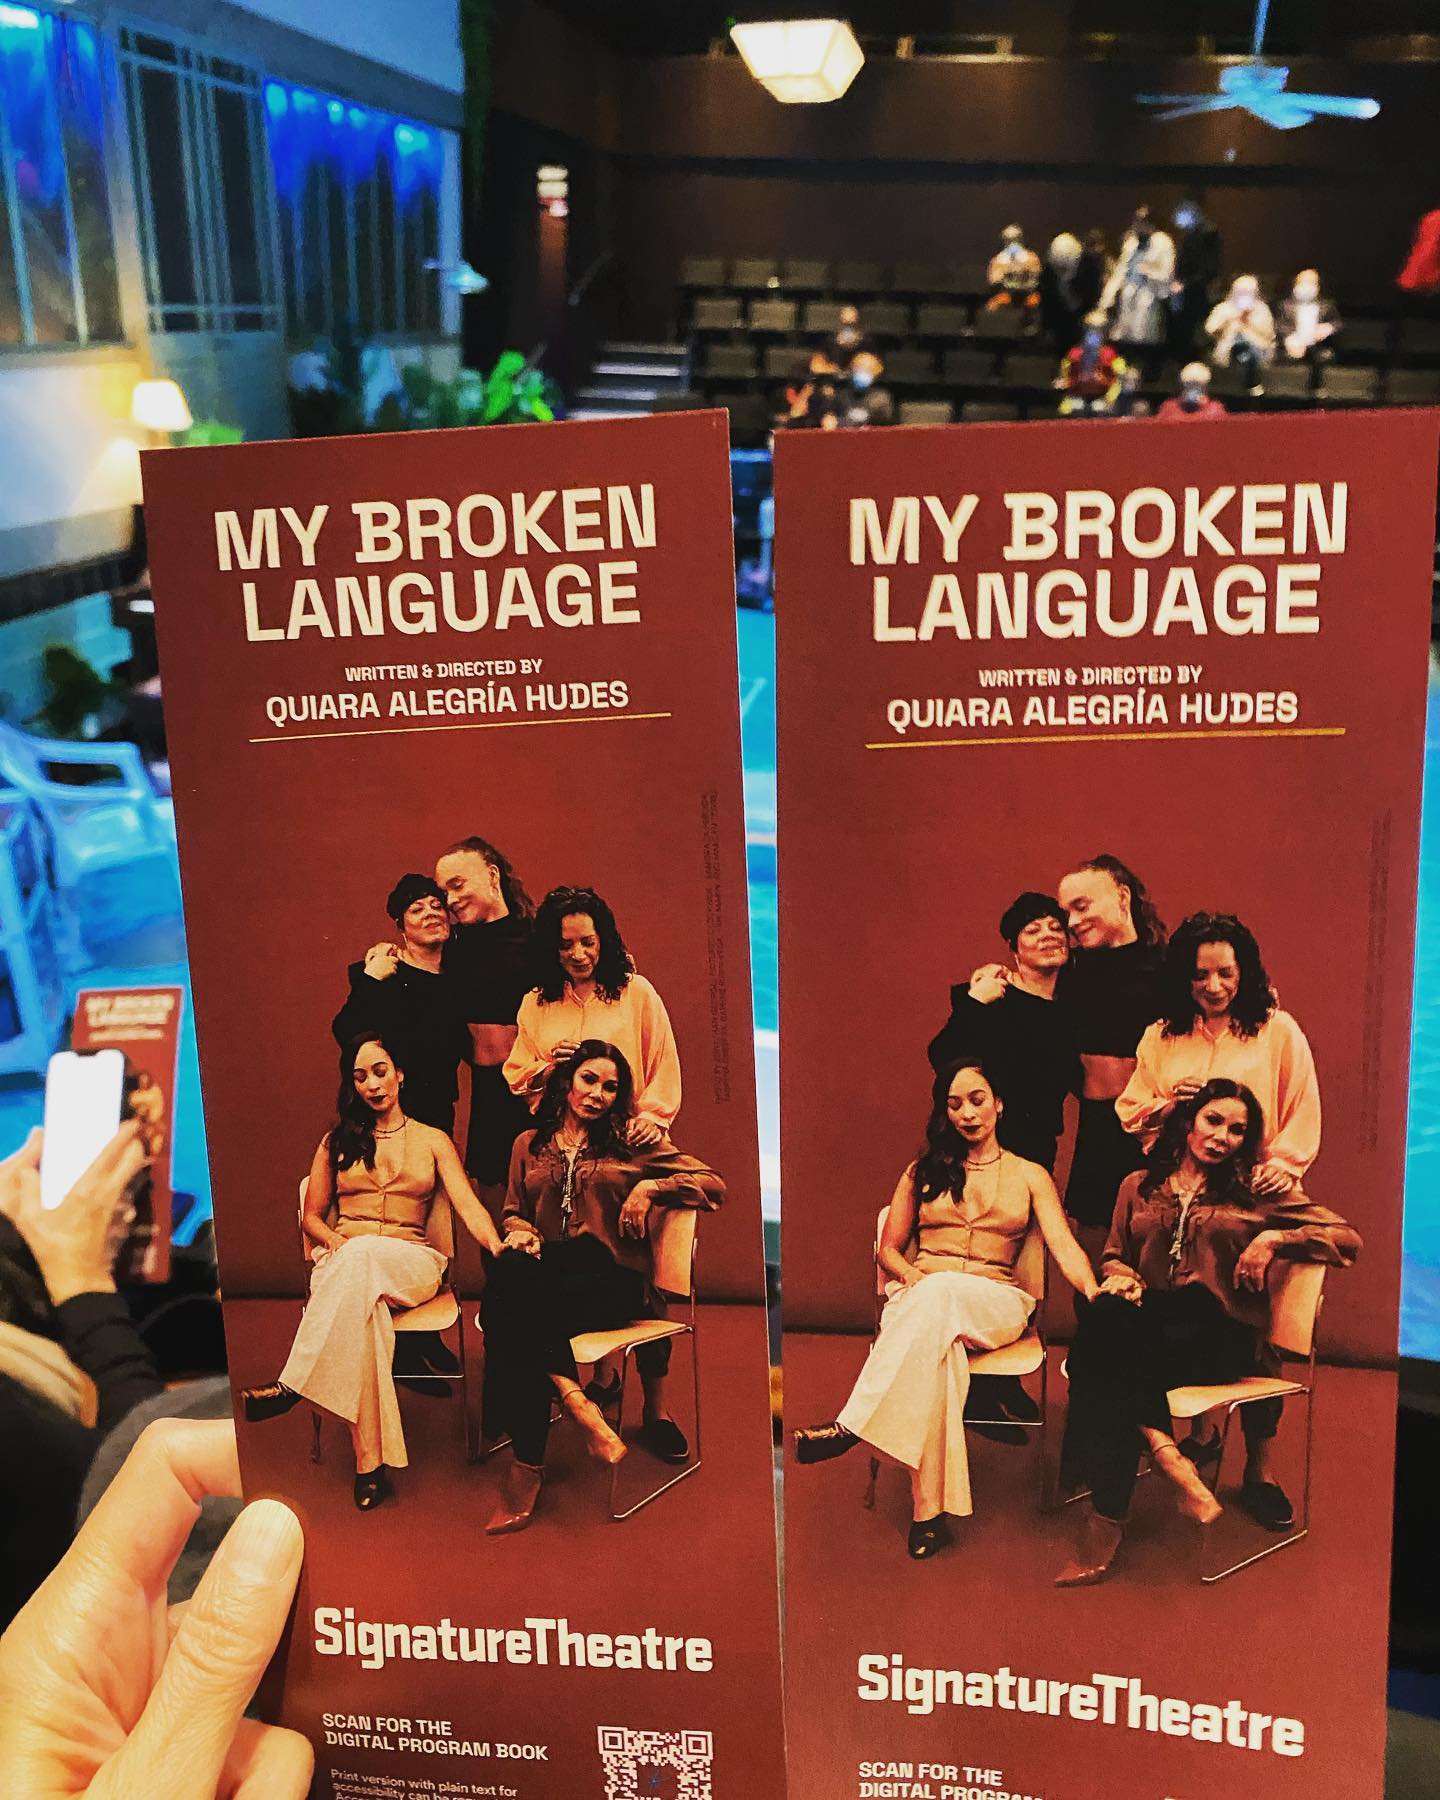 A great night @signatureinnyc watching  My Broken Language, a beautiful, personal play written and directed by @quiaraalegria . The language is exquisite. The performances are dynamic and graceful (they each play multiple roles). It’s a celebration of sisterhood, the female body, culture, literature, and feeling seen. We enjoyed an insightful interview with the playwright before the show which was an added delight! Signature’s season is starting out strong! #signaturetheatre #offbroadway #newplays #quiaraalegríahudes #nyctheatre #nonprofittheatre #offbroadwayplay #playwrights #ilovetheatre